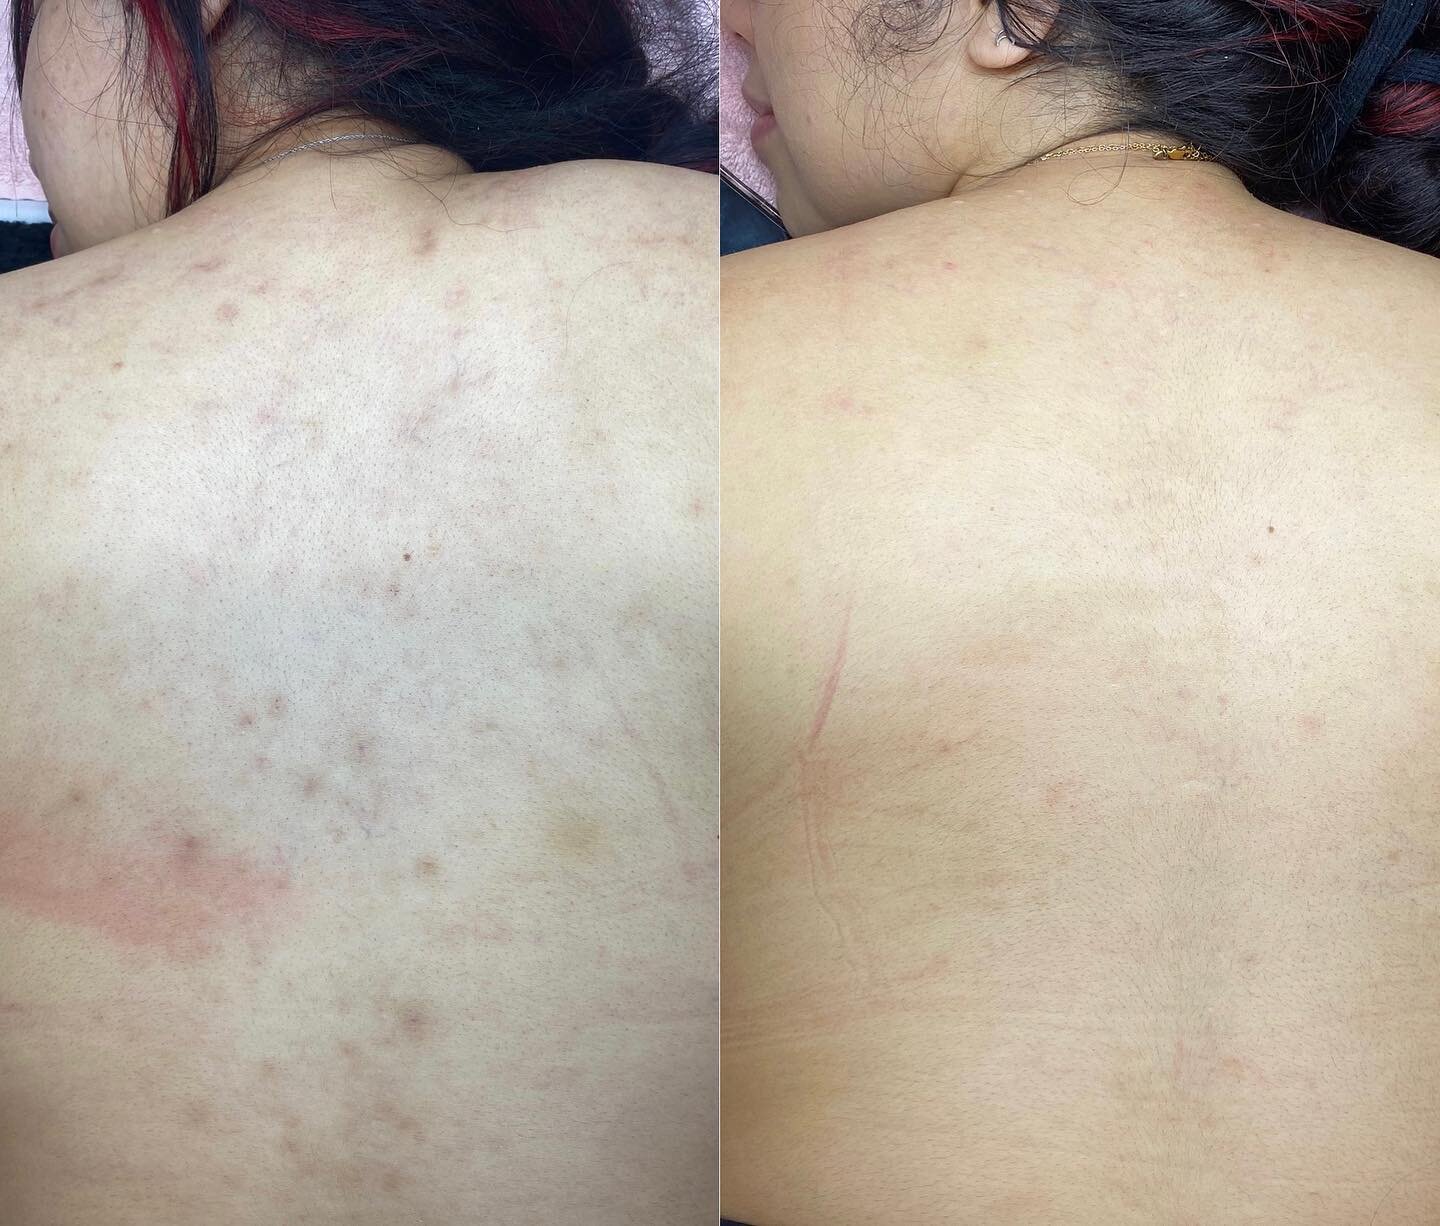 Love to see it!

It gives me such great joy sharing this before and after of my sweet client. She came to me seeking help for her body breakouts and acne marks and now here we are. 

She now feels confident wearing backless dresses and going to to th